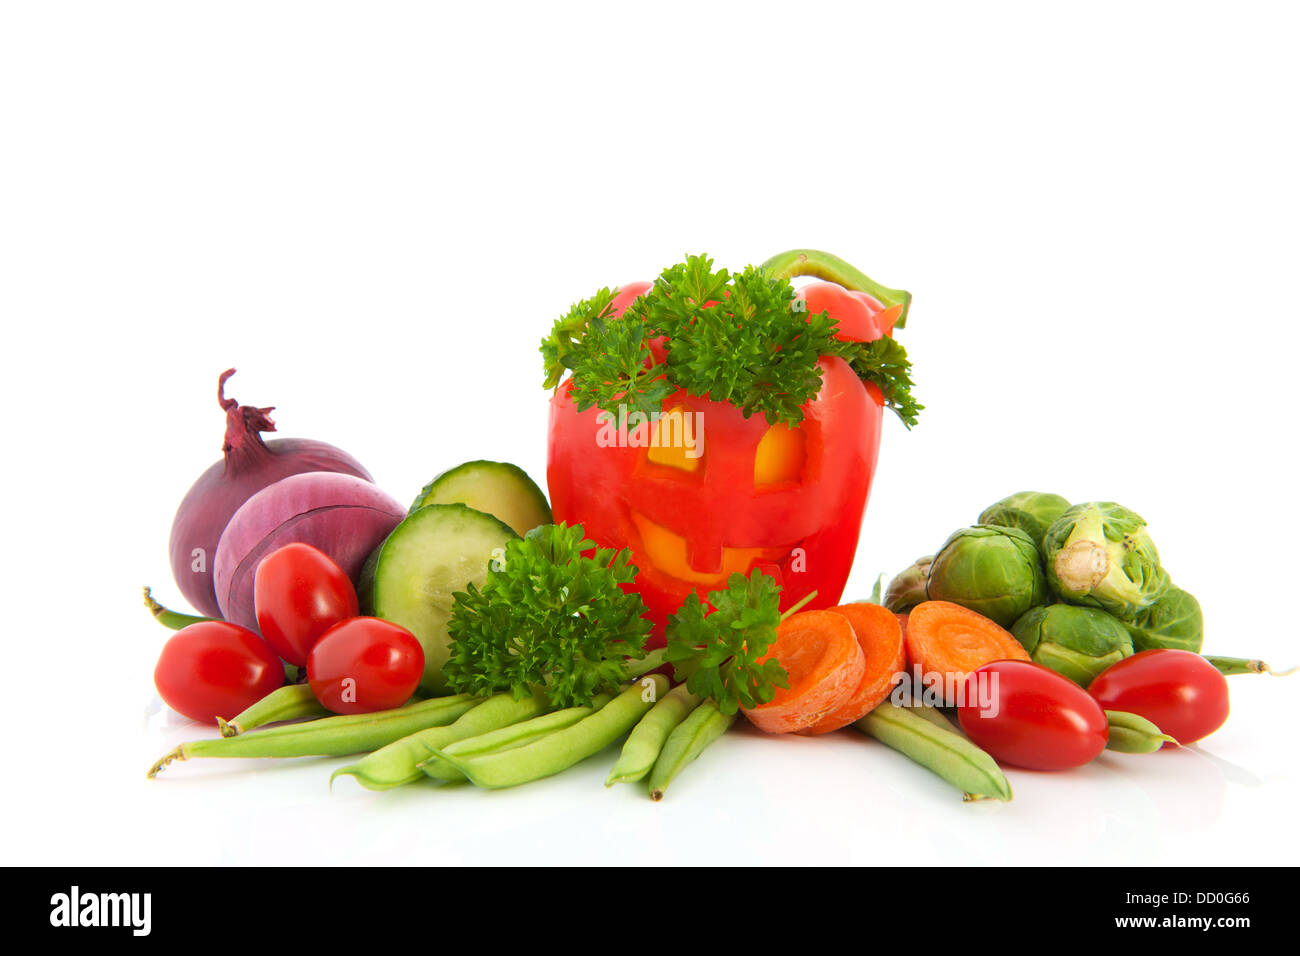 Funny paprika with vegetables Stock Photo